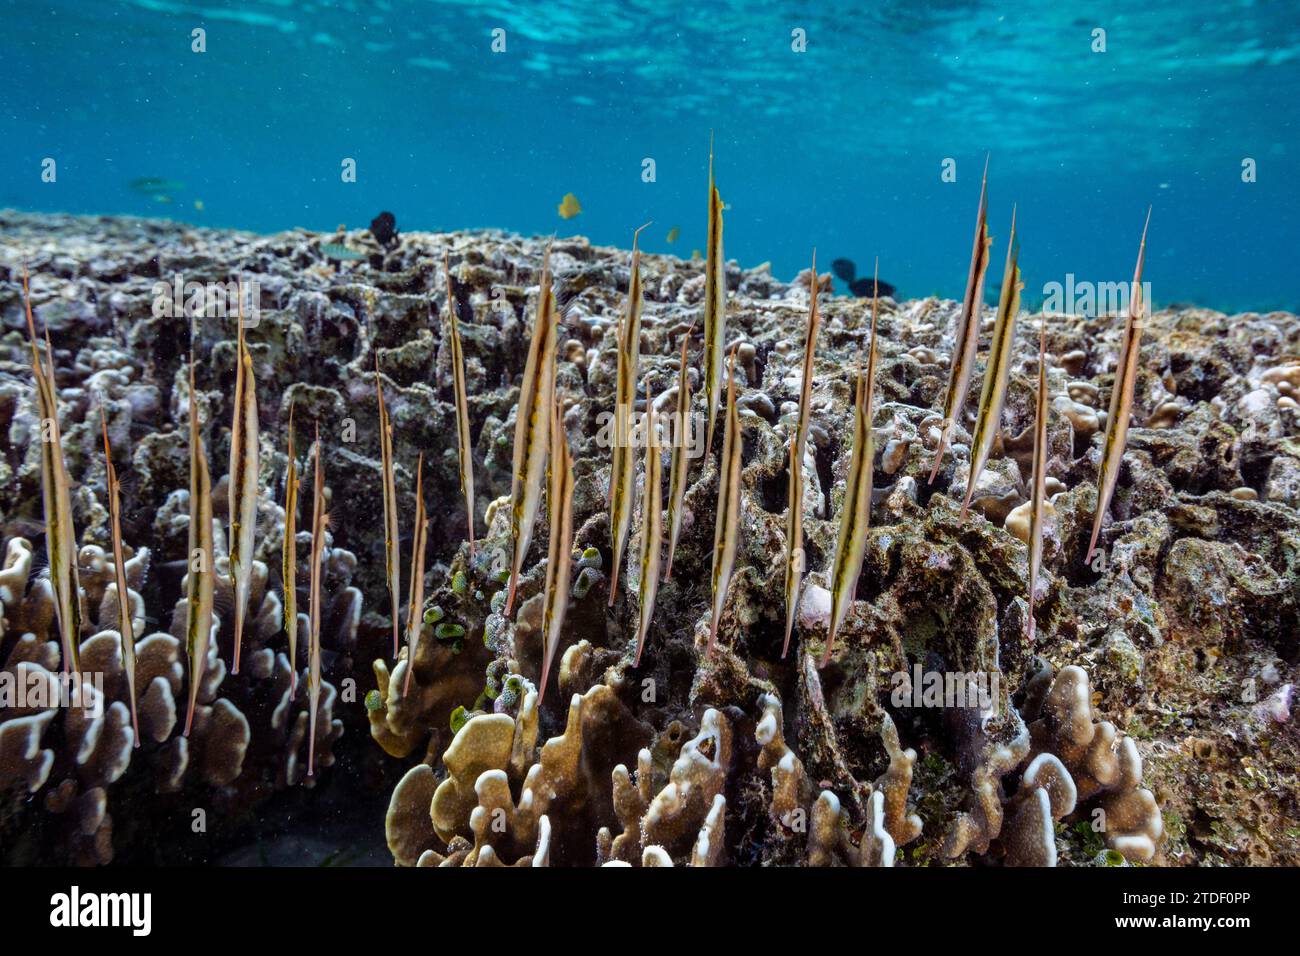 A school of jointed razorfish (Aeoliscus strigatus), in their usual head down formation, off Bangka Island, Indonesia, Southeast Asia, Asia Stock Photo